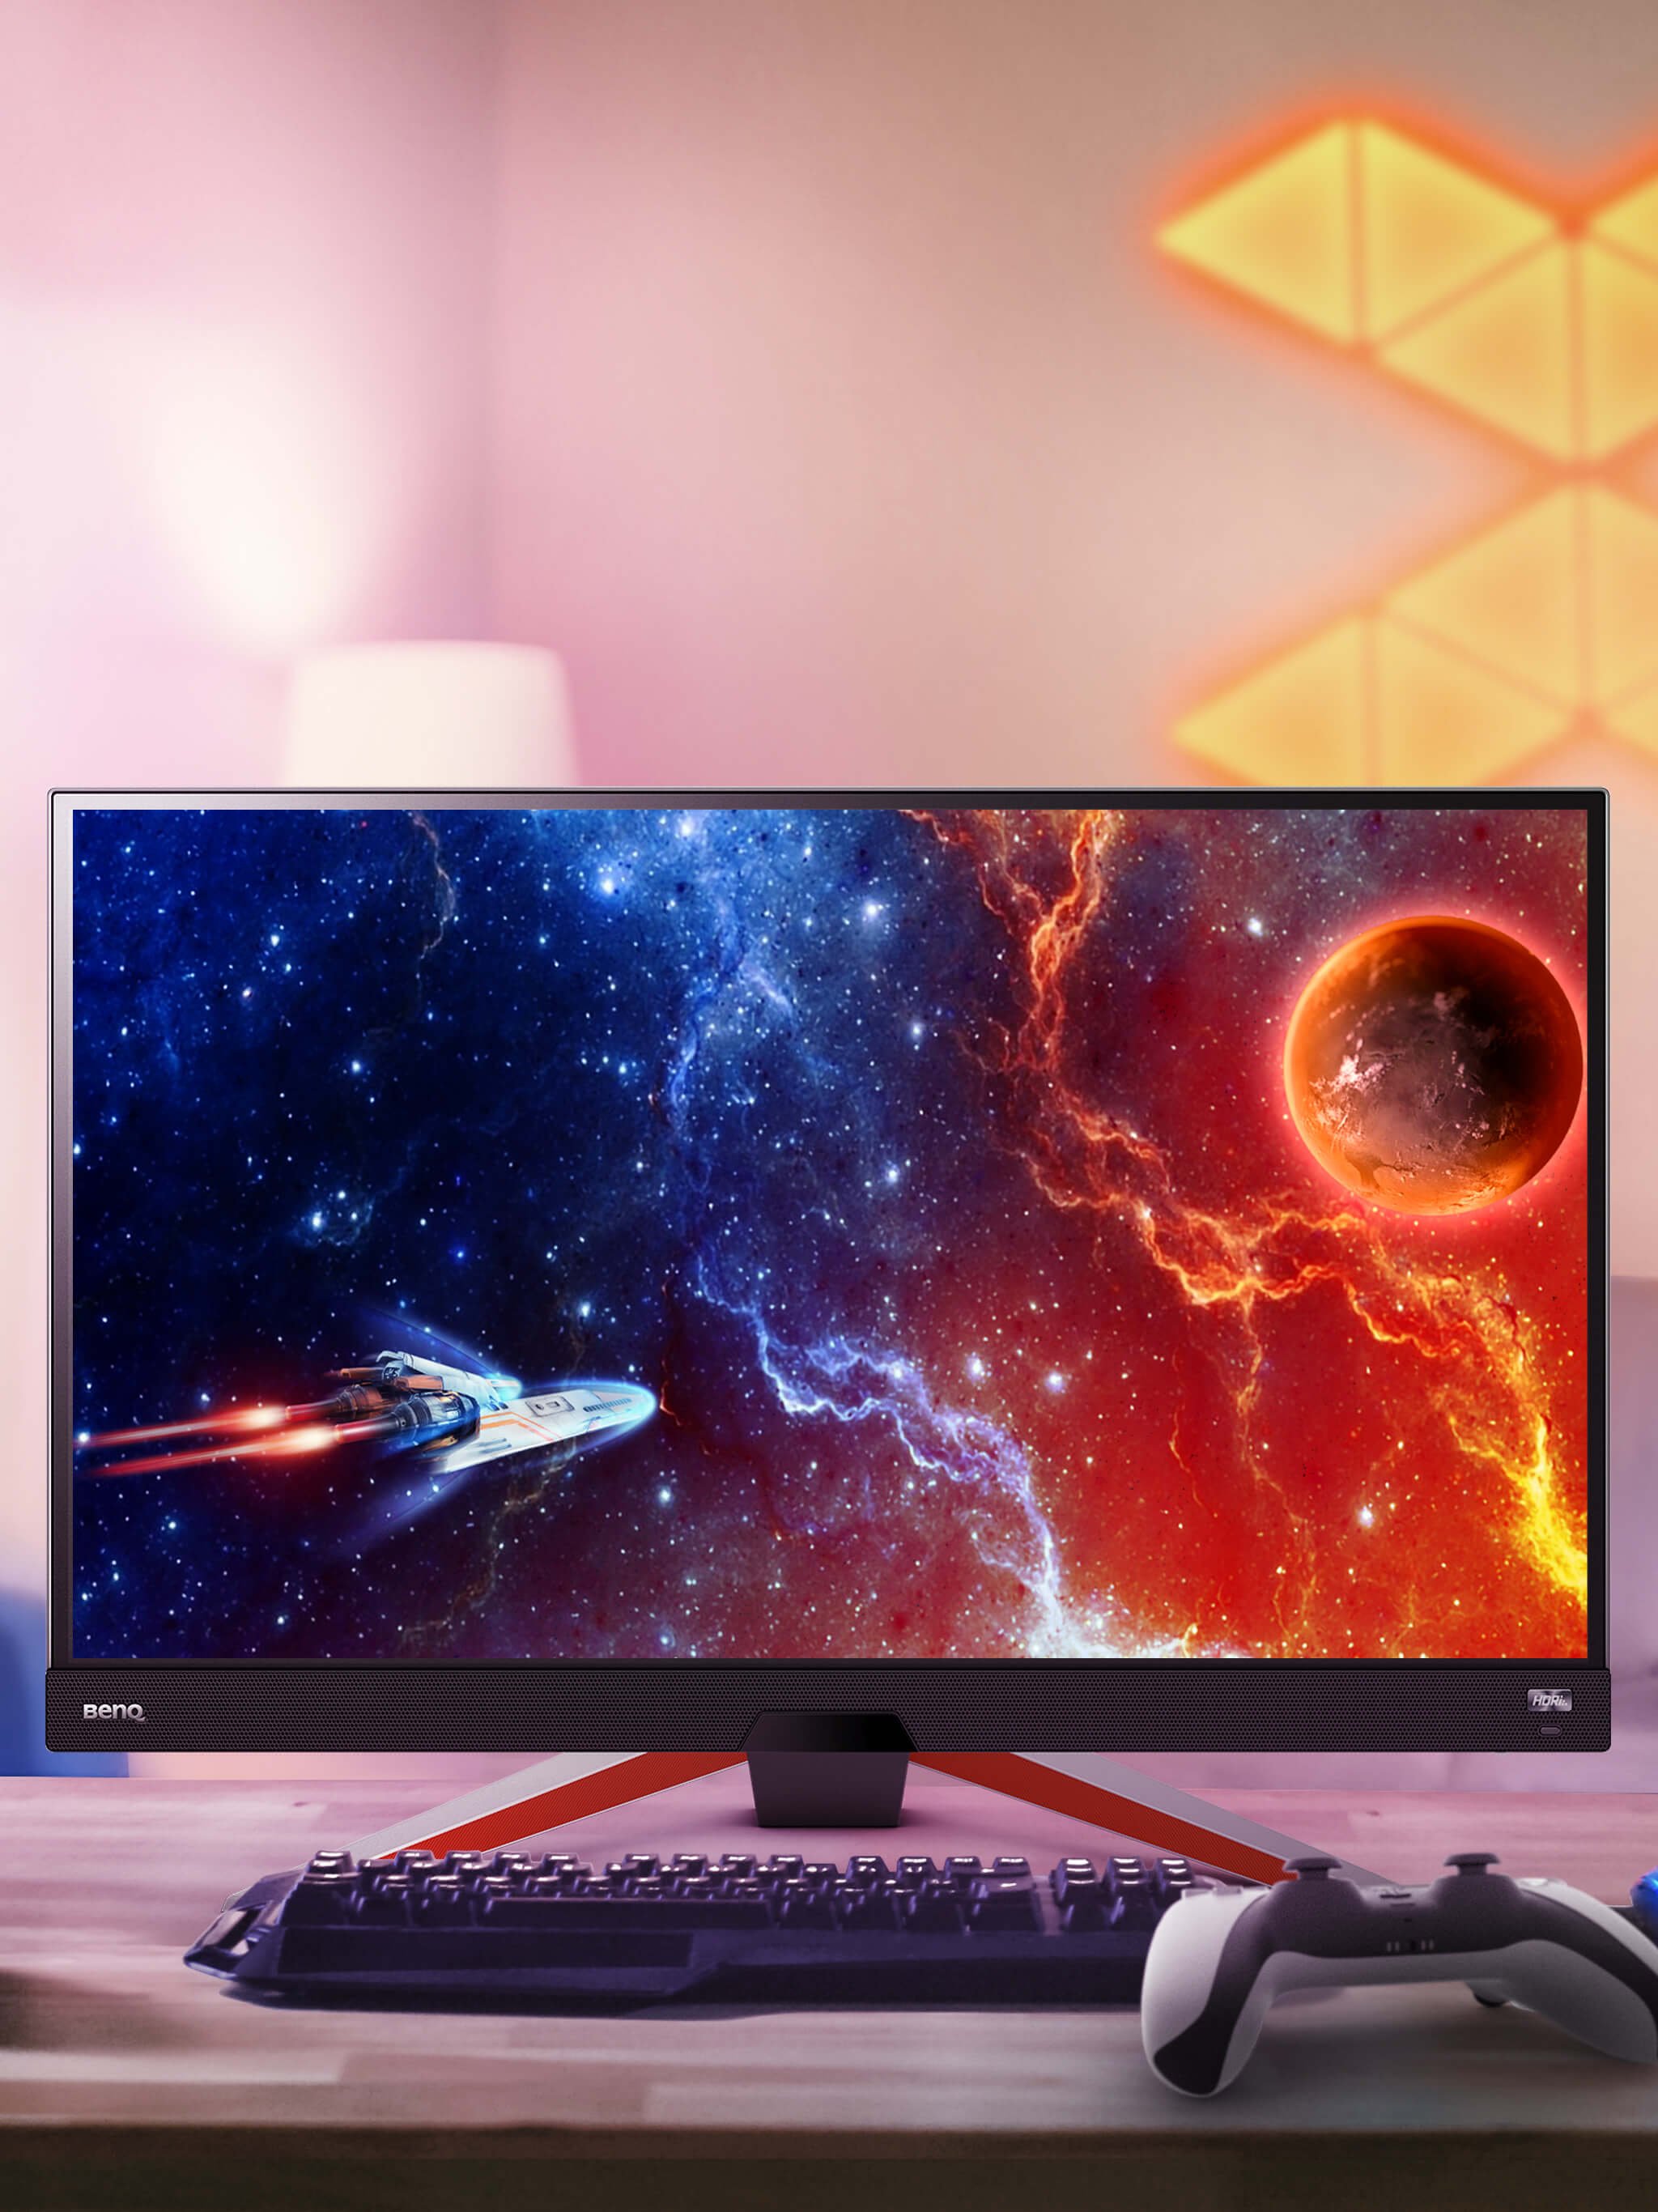 Reviews of ex2710s monitor